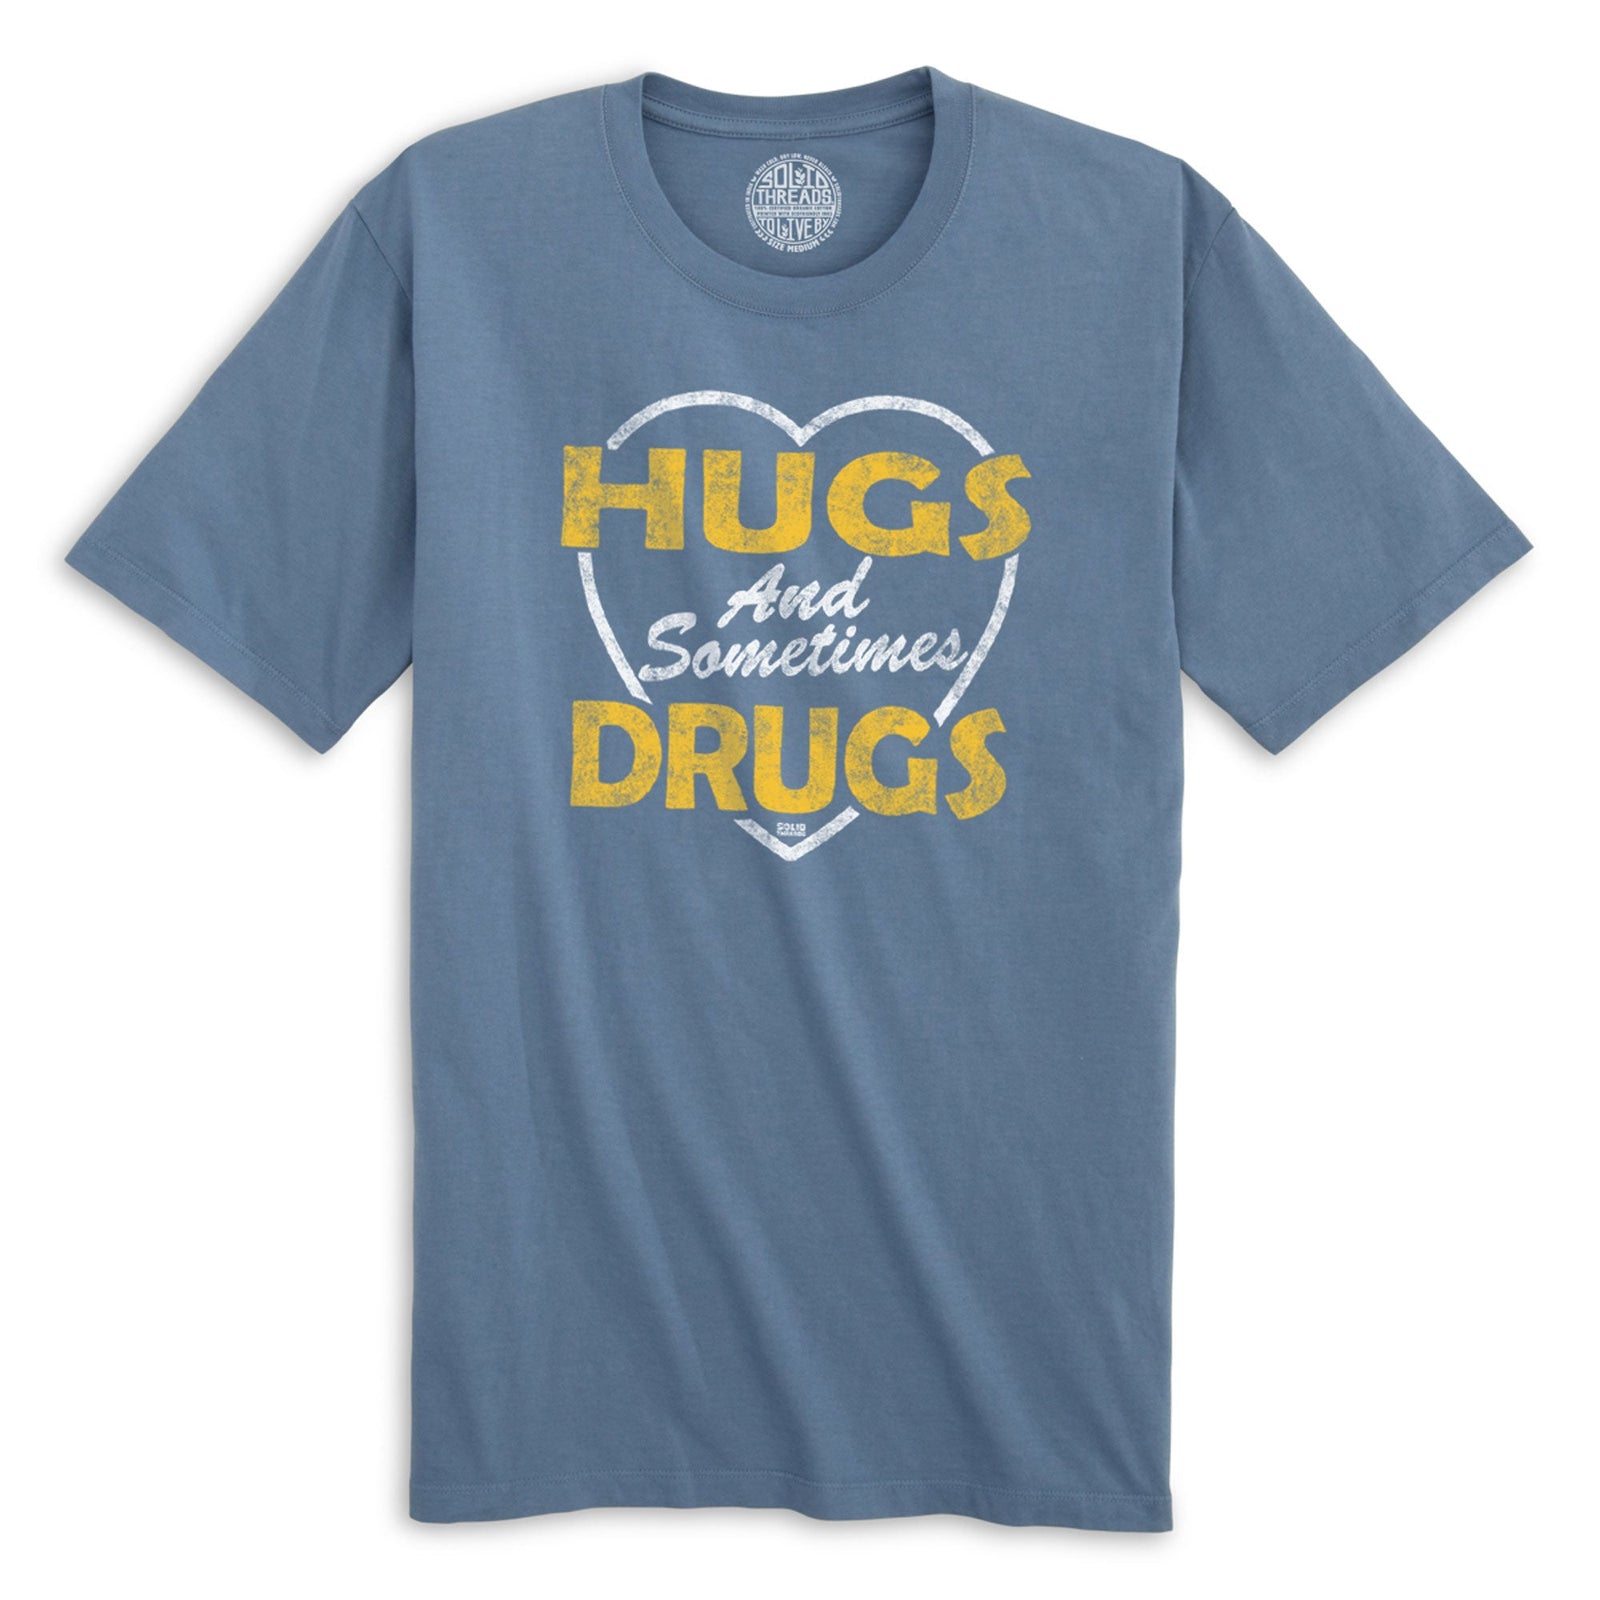 Hugs And Sometimes Drugs Retro Organic Cotton T-shirt | Funny Festival   Tee | Solid Threads